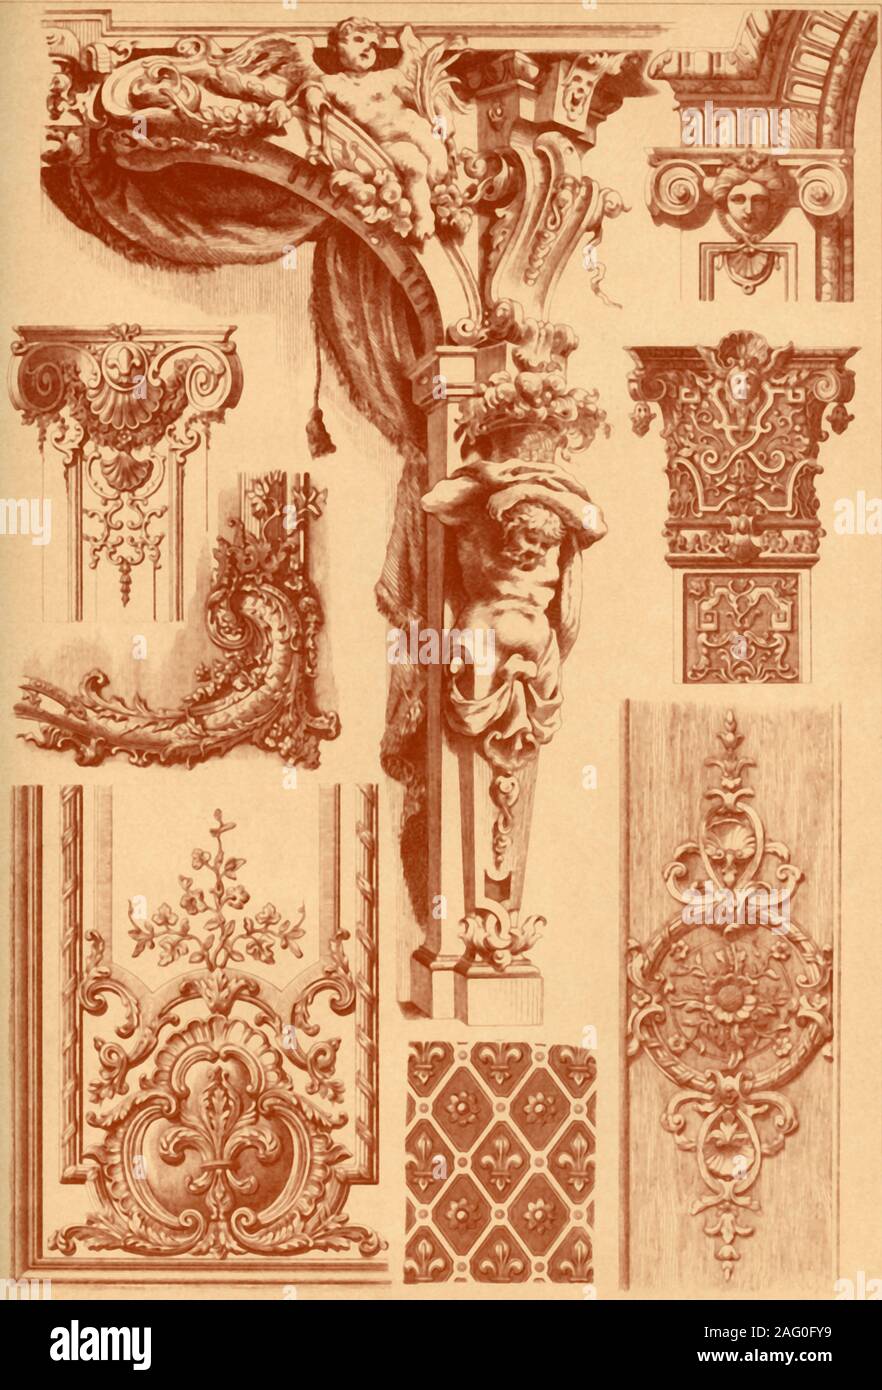 Plaster ornaments, France, 17th and 18th centuries, (1898). 'Fig 1: Panel decorations at door and window niches in the throne room of the Castle at Fontainebleau, style of Louis XIV [c1643-1715]. Fig 2: Projecting plane pattern in the panels of door and window niches in the queen's bed-chamber in the same Castle, style of Louis XIV. Fig 3: Wood carving from a wainscot in the Chateau de Bercy, style of Louis XIV. Fig 4: Capital of a mirror in the state-room of the Hotel de Lauzun at Paris, style of Louis XIV. Fig 5: Capital designed by the German Master Paul Decker, style of Louis XIV. Fig 6: C Stock Photo